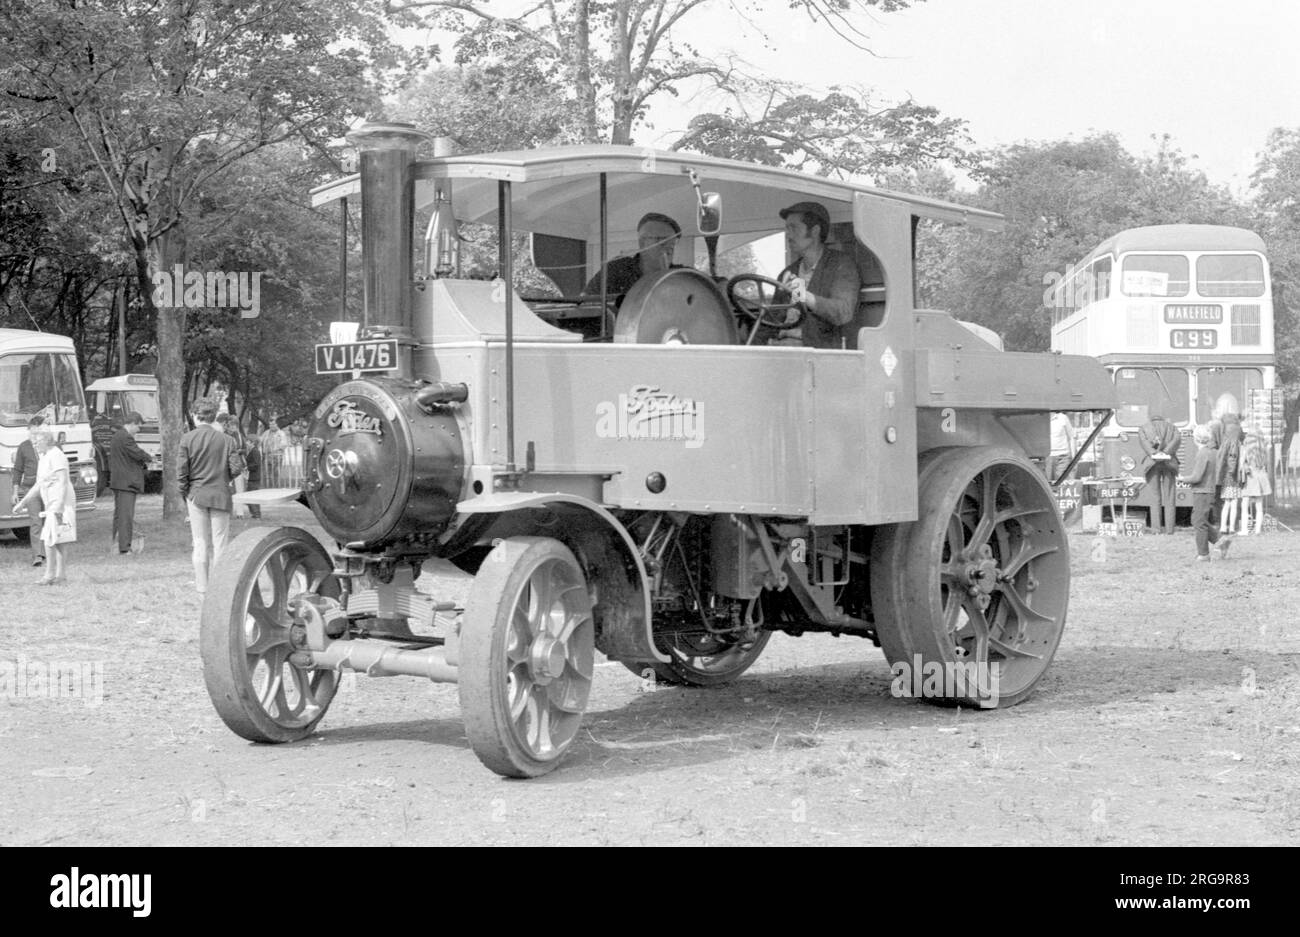 Foden Tractor 13266, Rosie at the 1973 Clapham Common rally:- Maker: Edwin Foden, Sons and Co of Elworth Works, Sandbach, Type: Tractor Number: 13266 Built: 1928 Registration: VJ 1476 Cylinders: Compound Nhp: 4 Name: Rosie Stock Photo